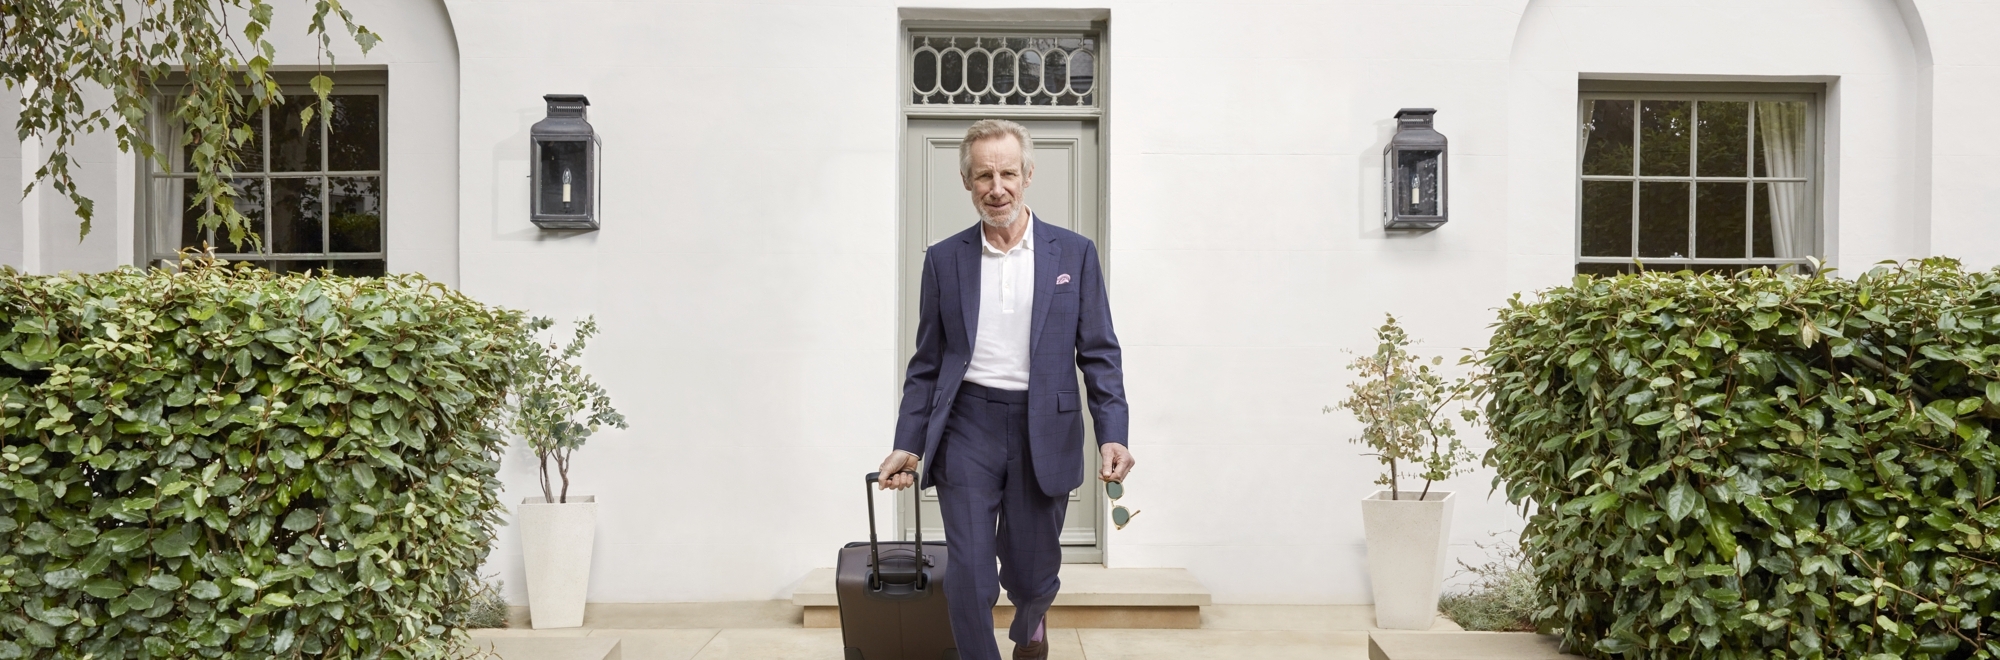 Vintage, classic and savvy: ﻿Saga launches a new brand campaign focussing on the more positive side of getting older